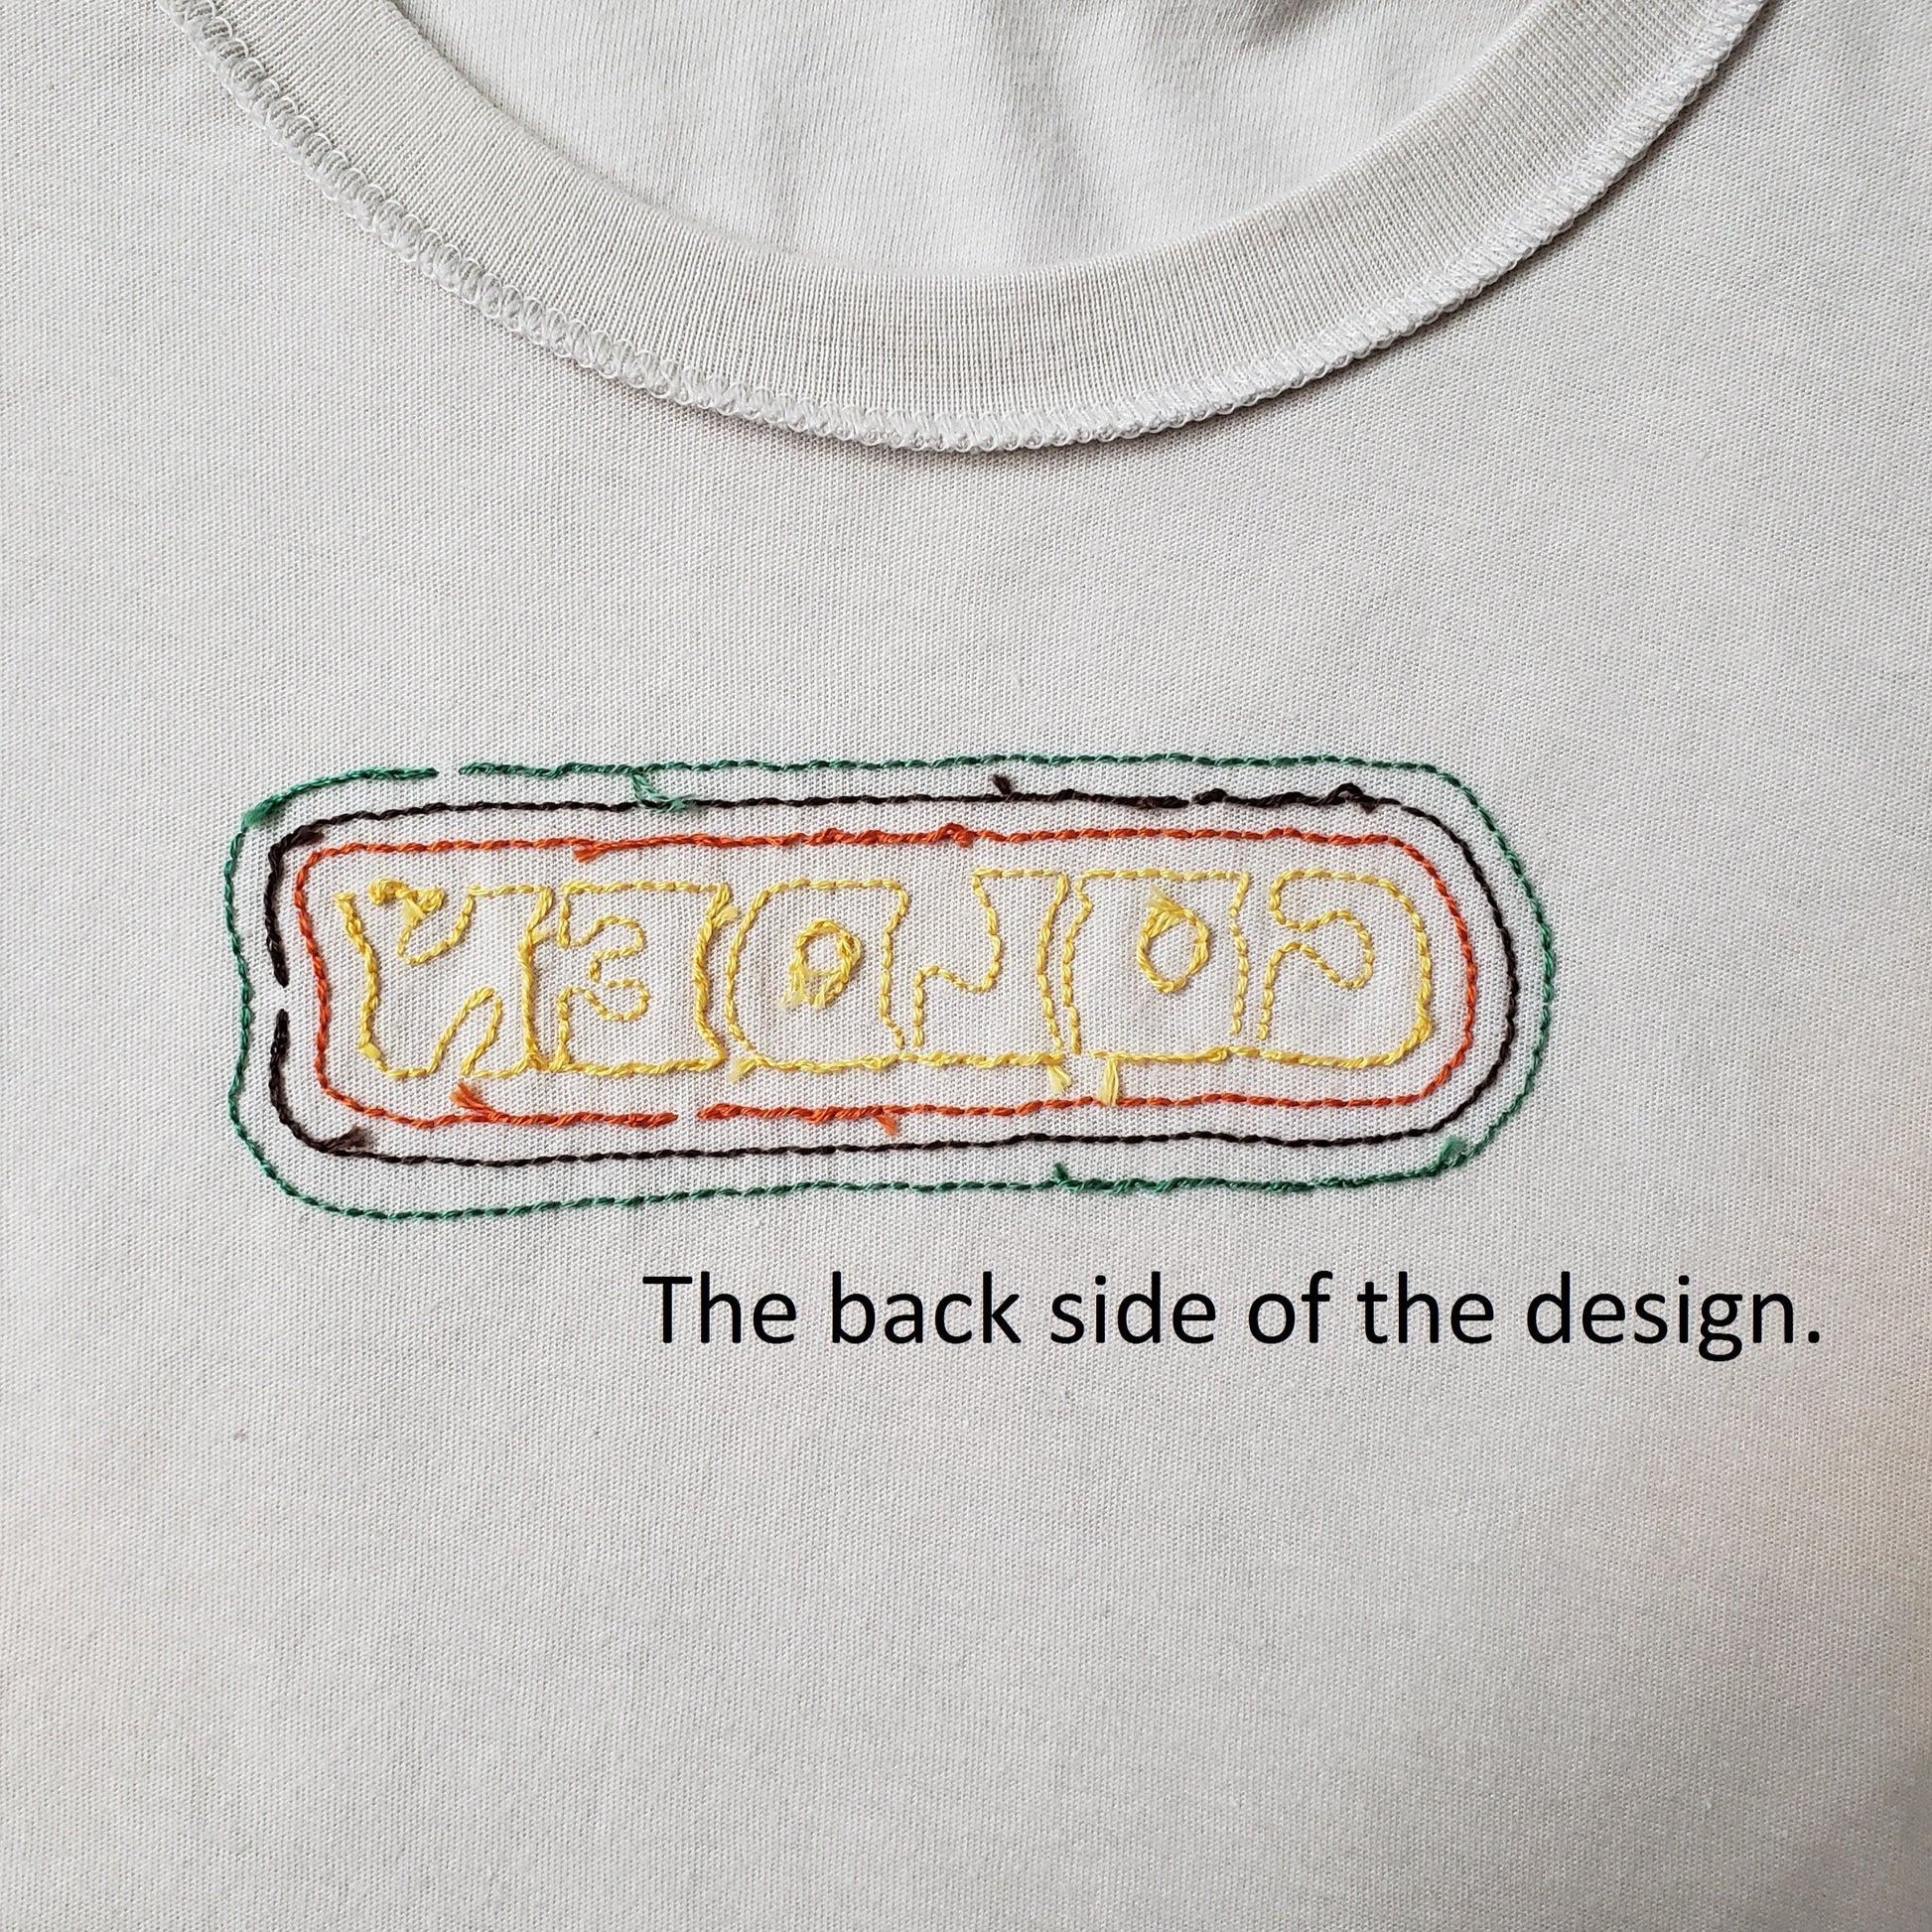 The back side of the design. It looks tidy with no errant threads.